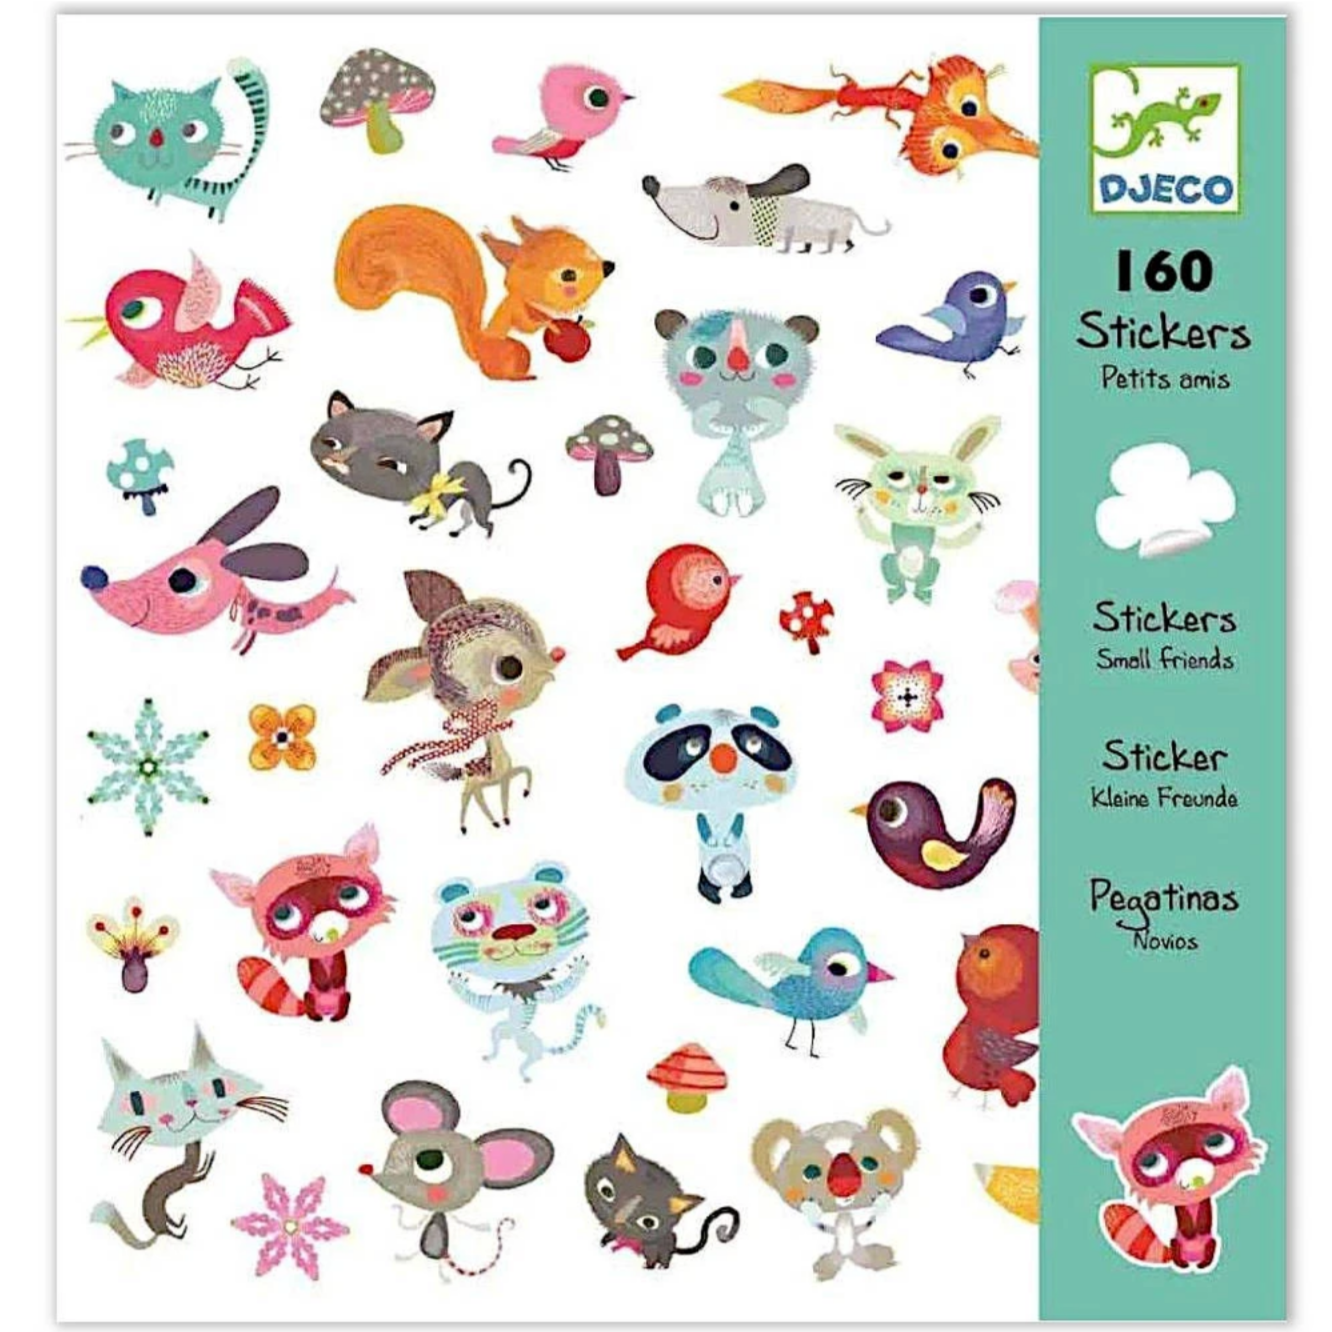 package showing cute animal stickers